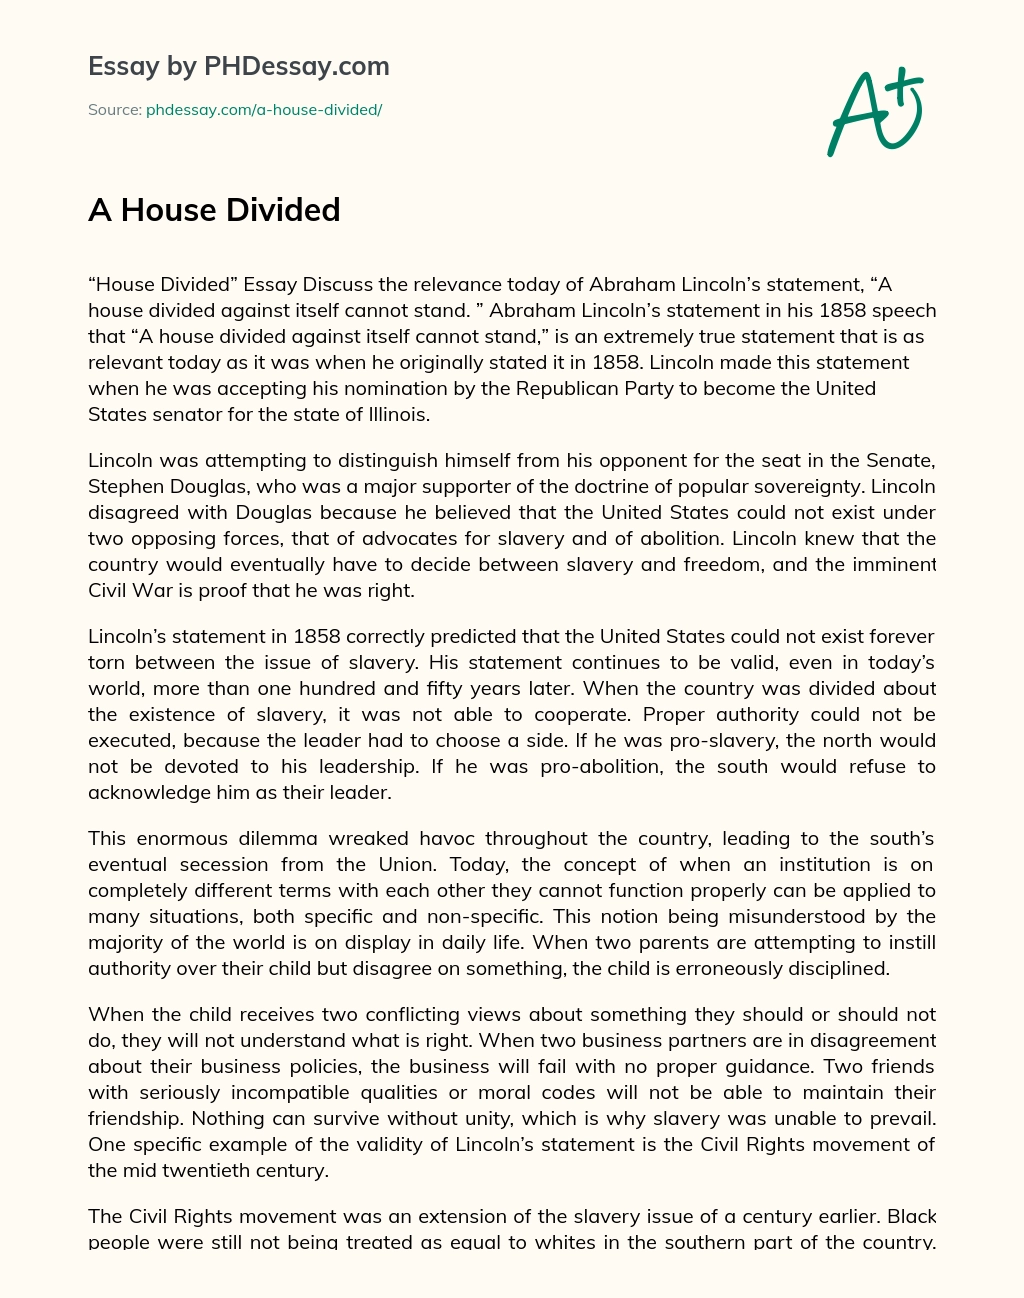 A House Divided essay